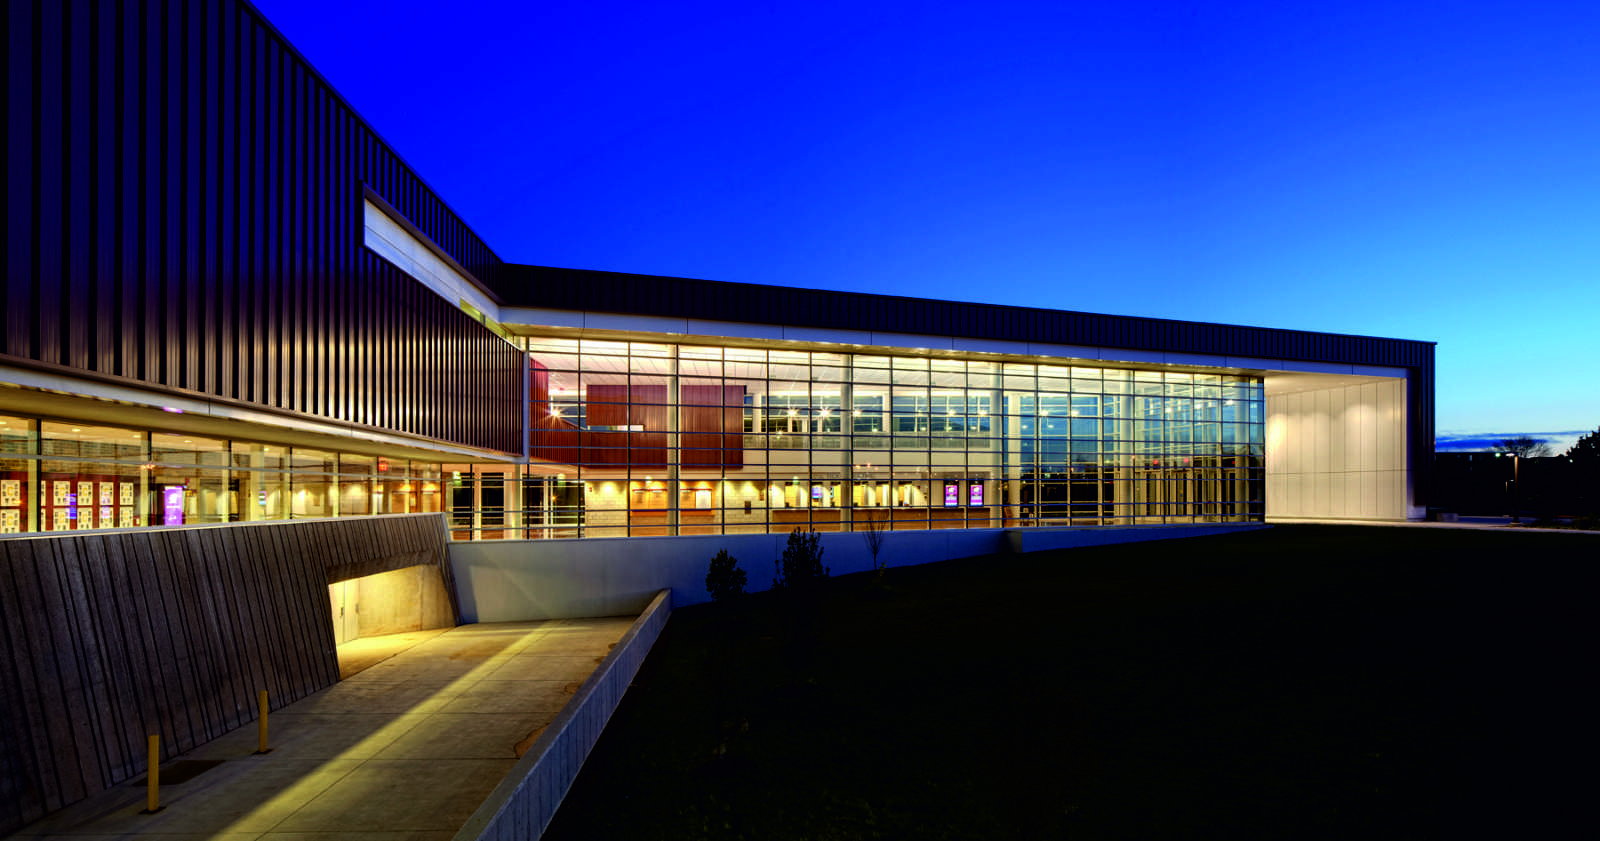  CENTRAL  MICHIGAN  S EVENTS CENTER BY SMITHGROUP JJR